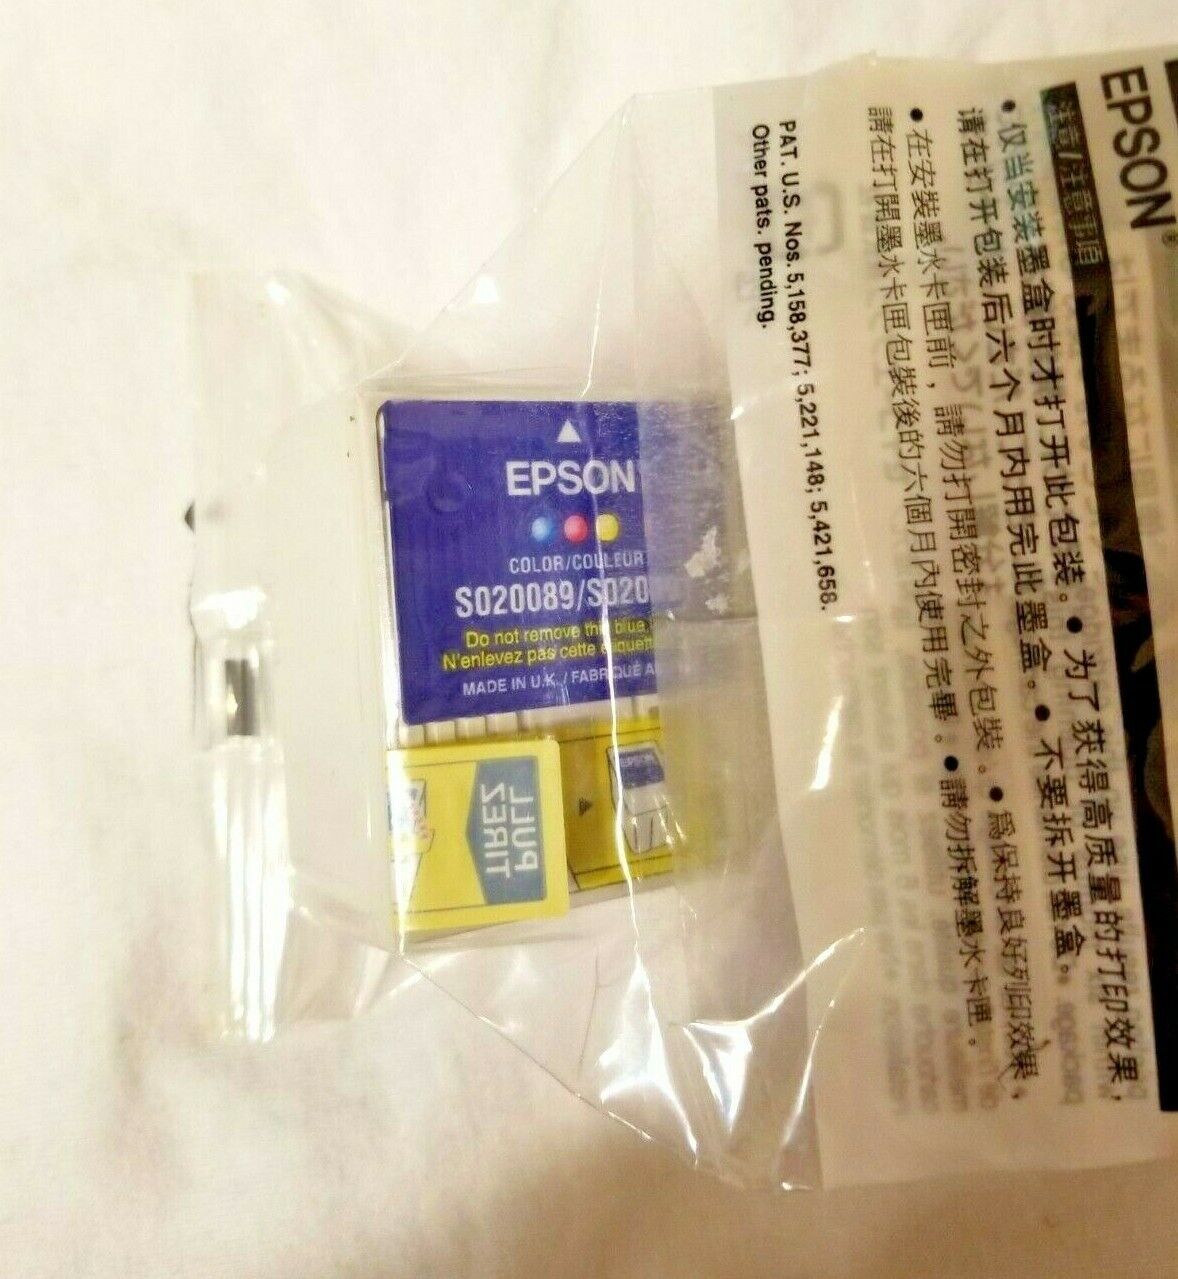 Epson  color S020089 S020191 sealed in plastic 1 item